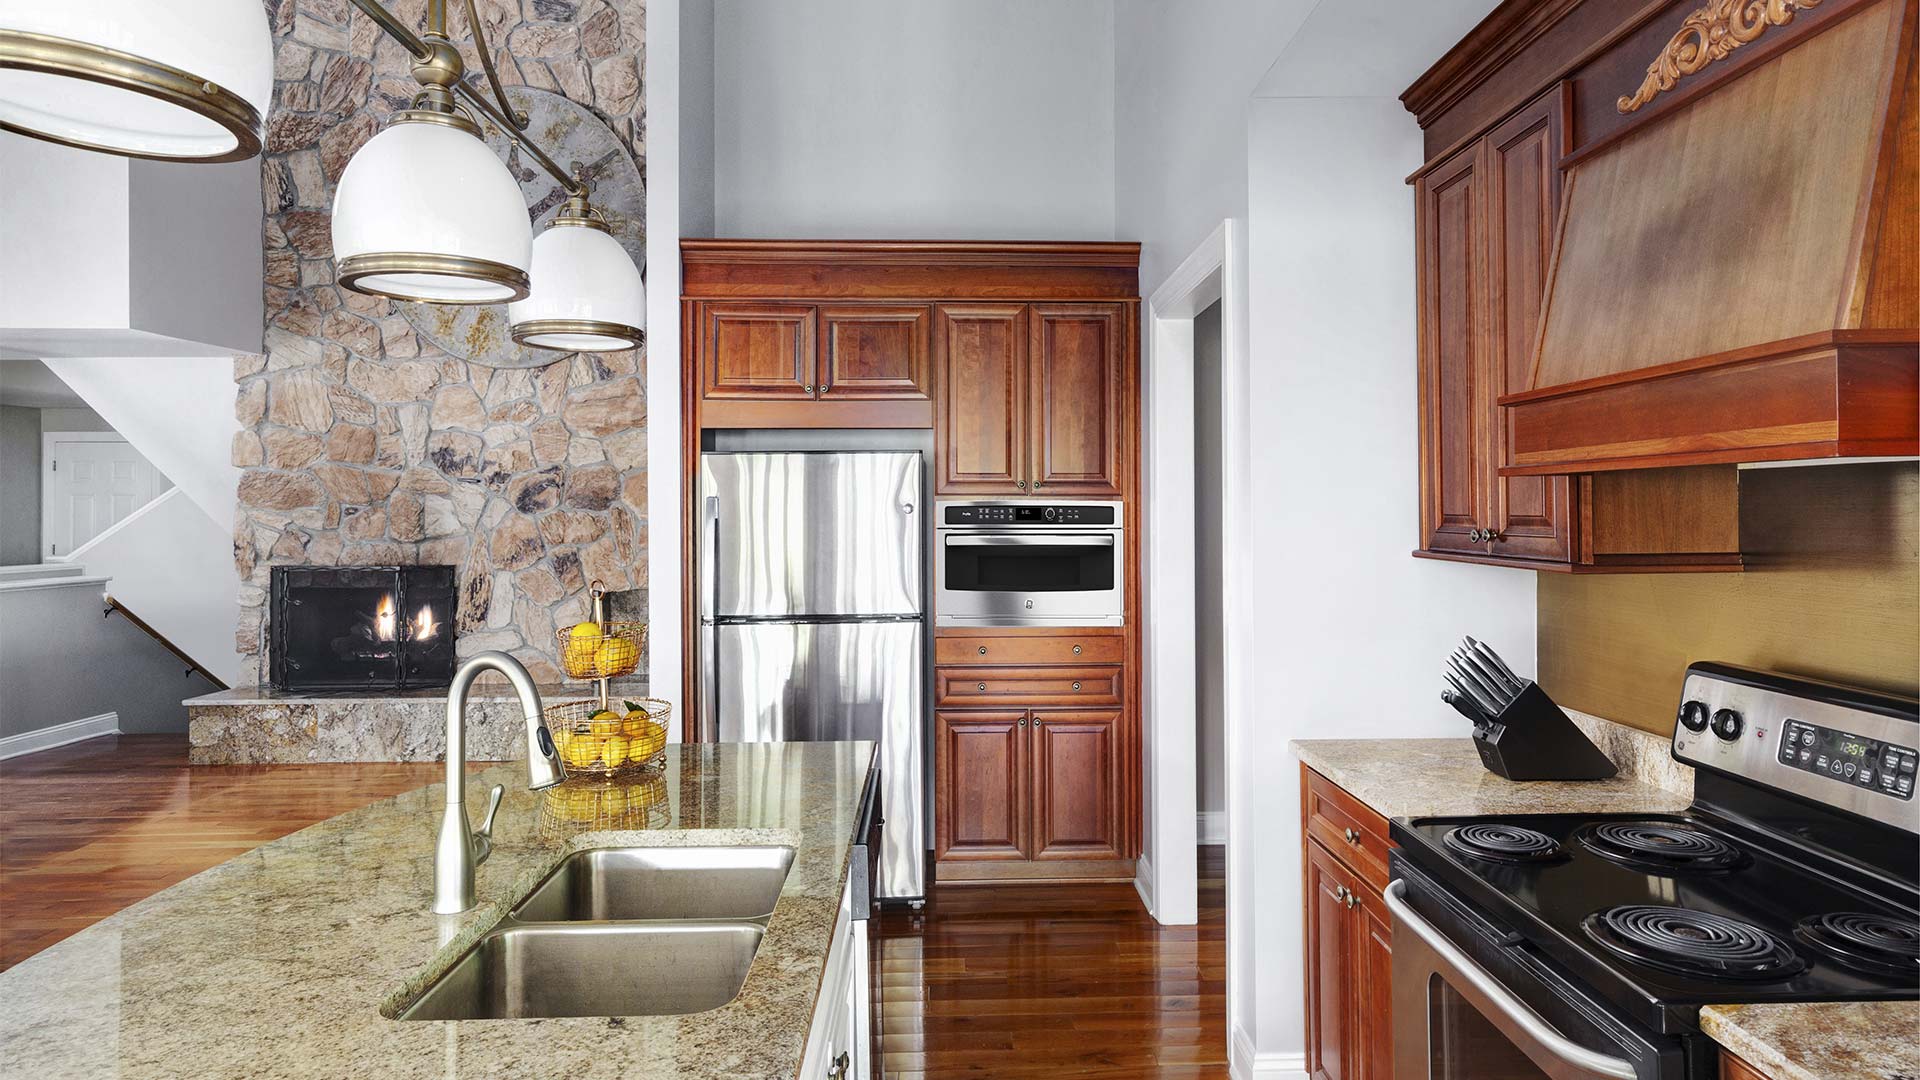 interior shot of garshak's kitchen. There is a center island with two sinks. There is a full fridge and microwave in the background surrounded by dark wood cabinets. Across from the sink is the stovetop and more counter space and overhead cabinets.